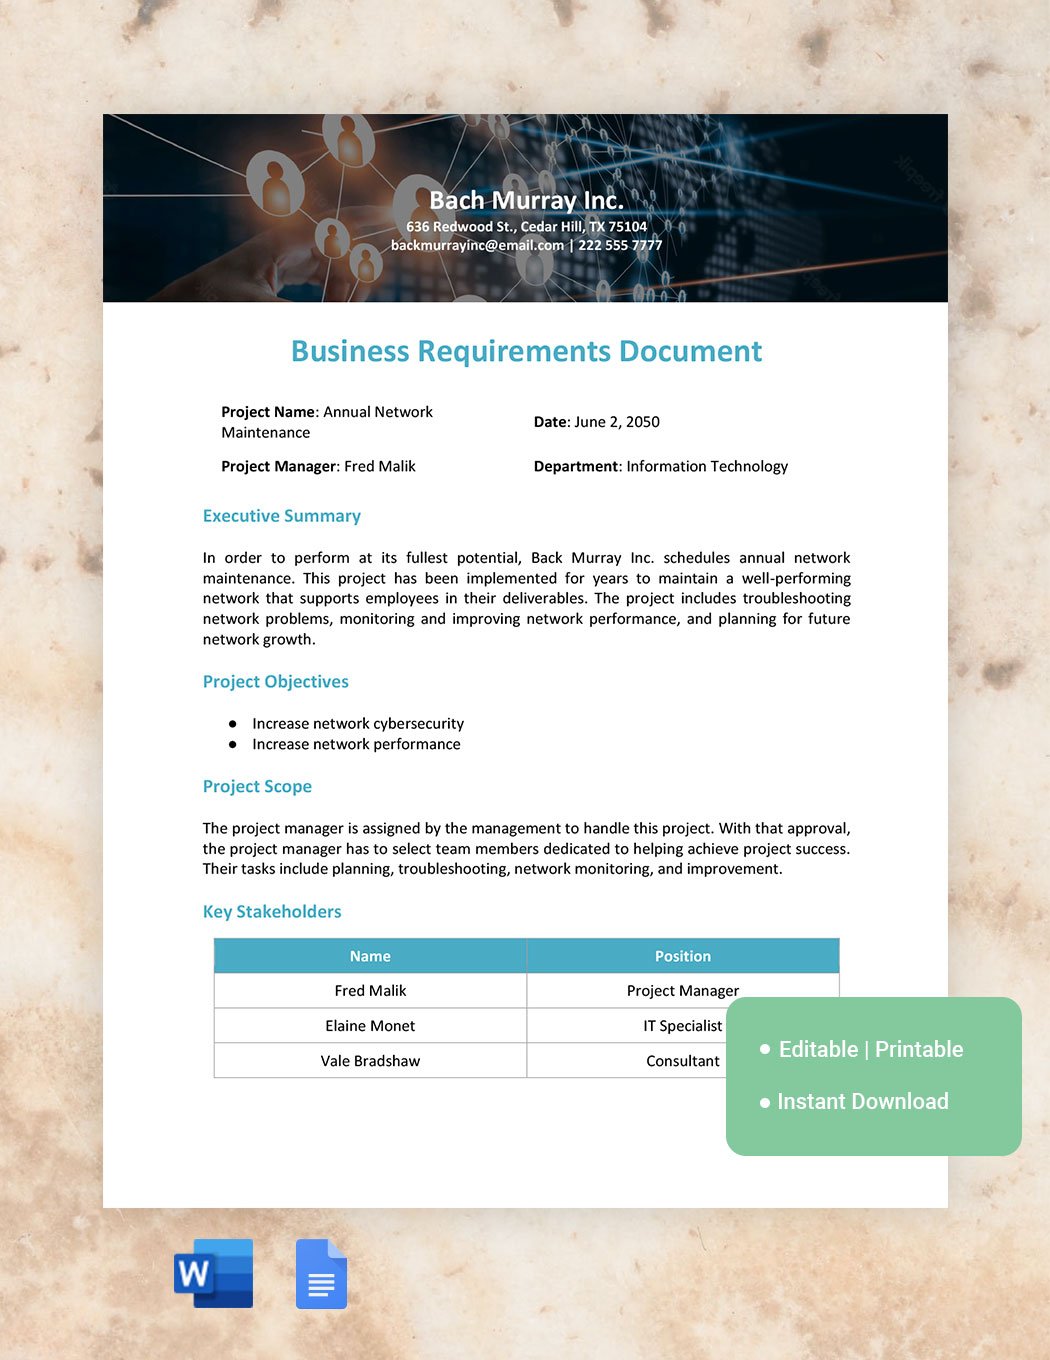 Business Requirements Document Template in Word, Google Docs